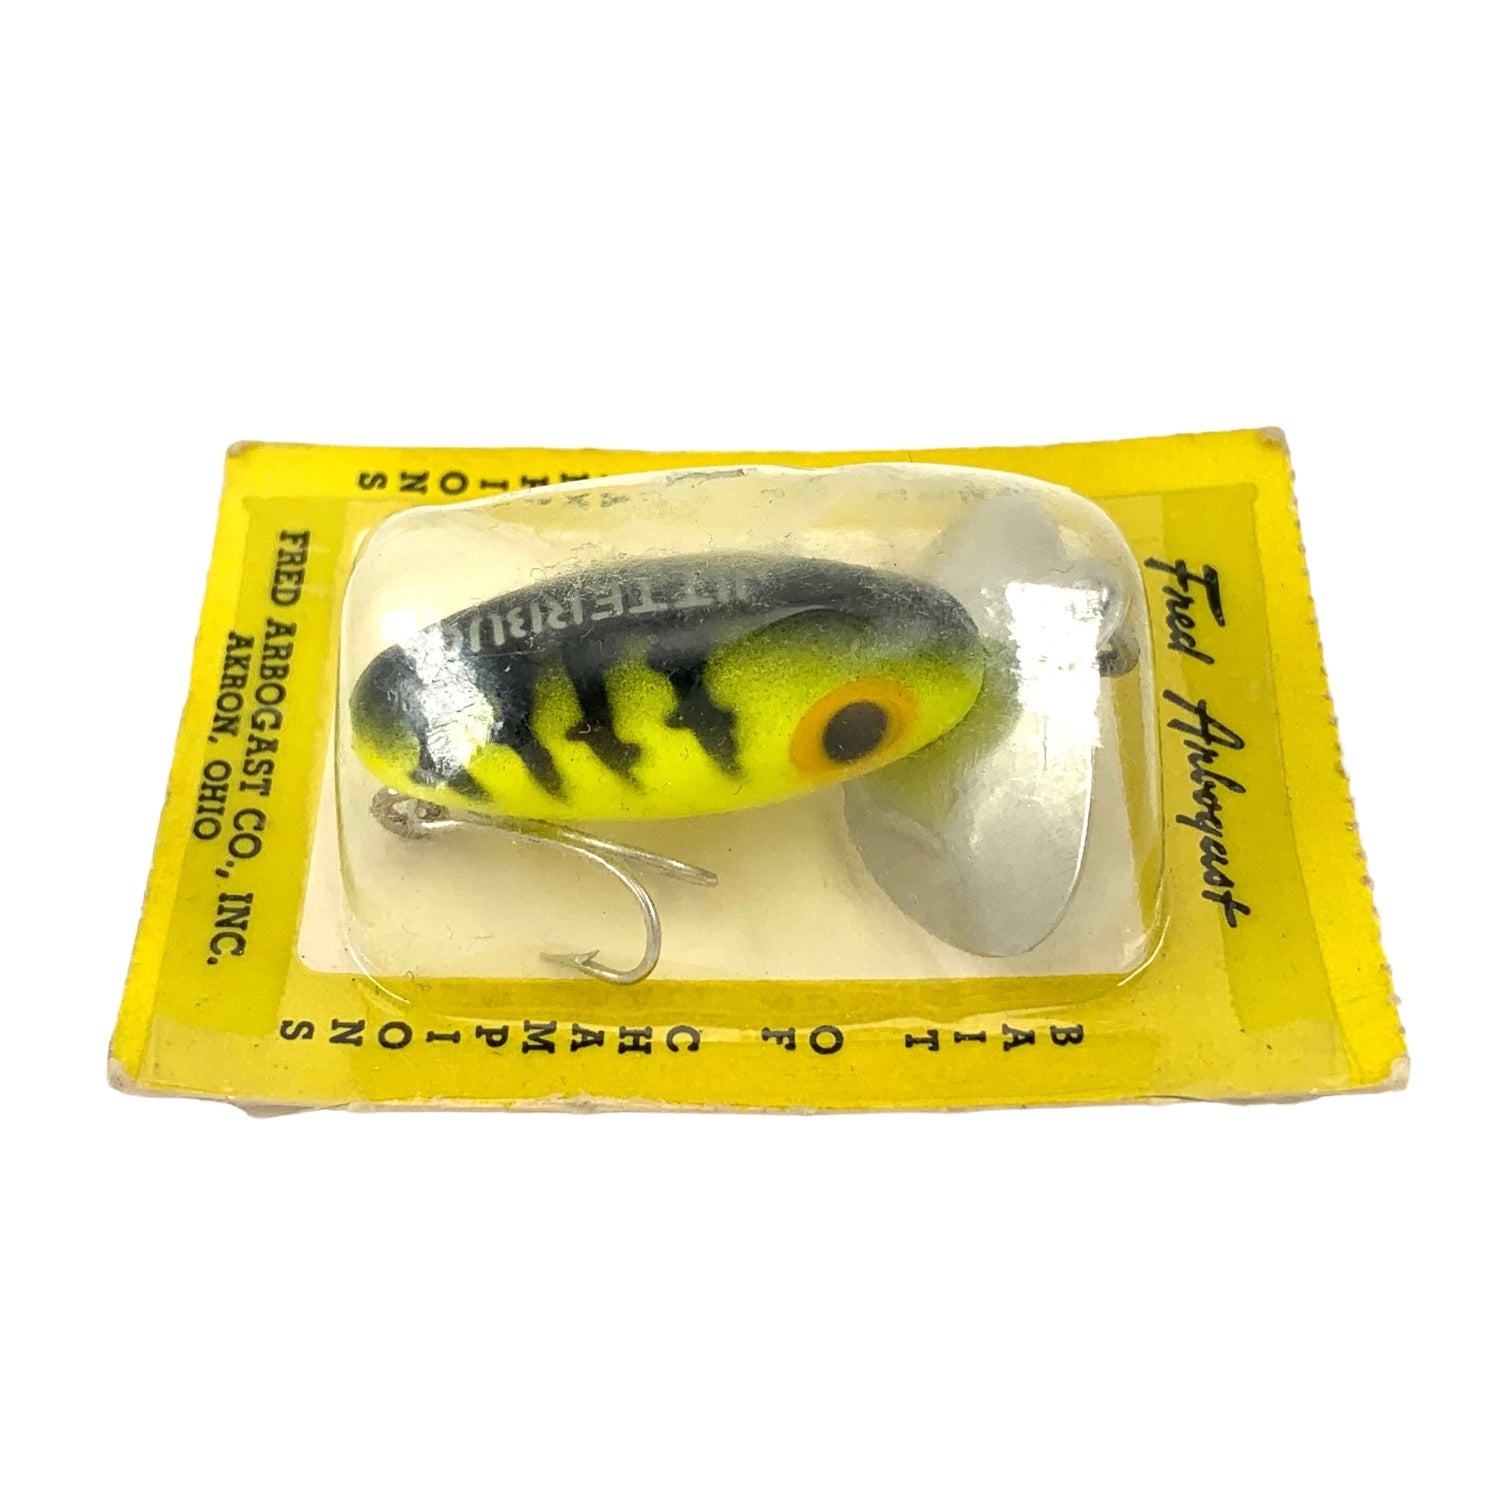 FRED ARBOGAST Fly Rod Size JITTERBUG Lure • CHARTREUSE SOB – Toad